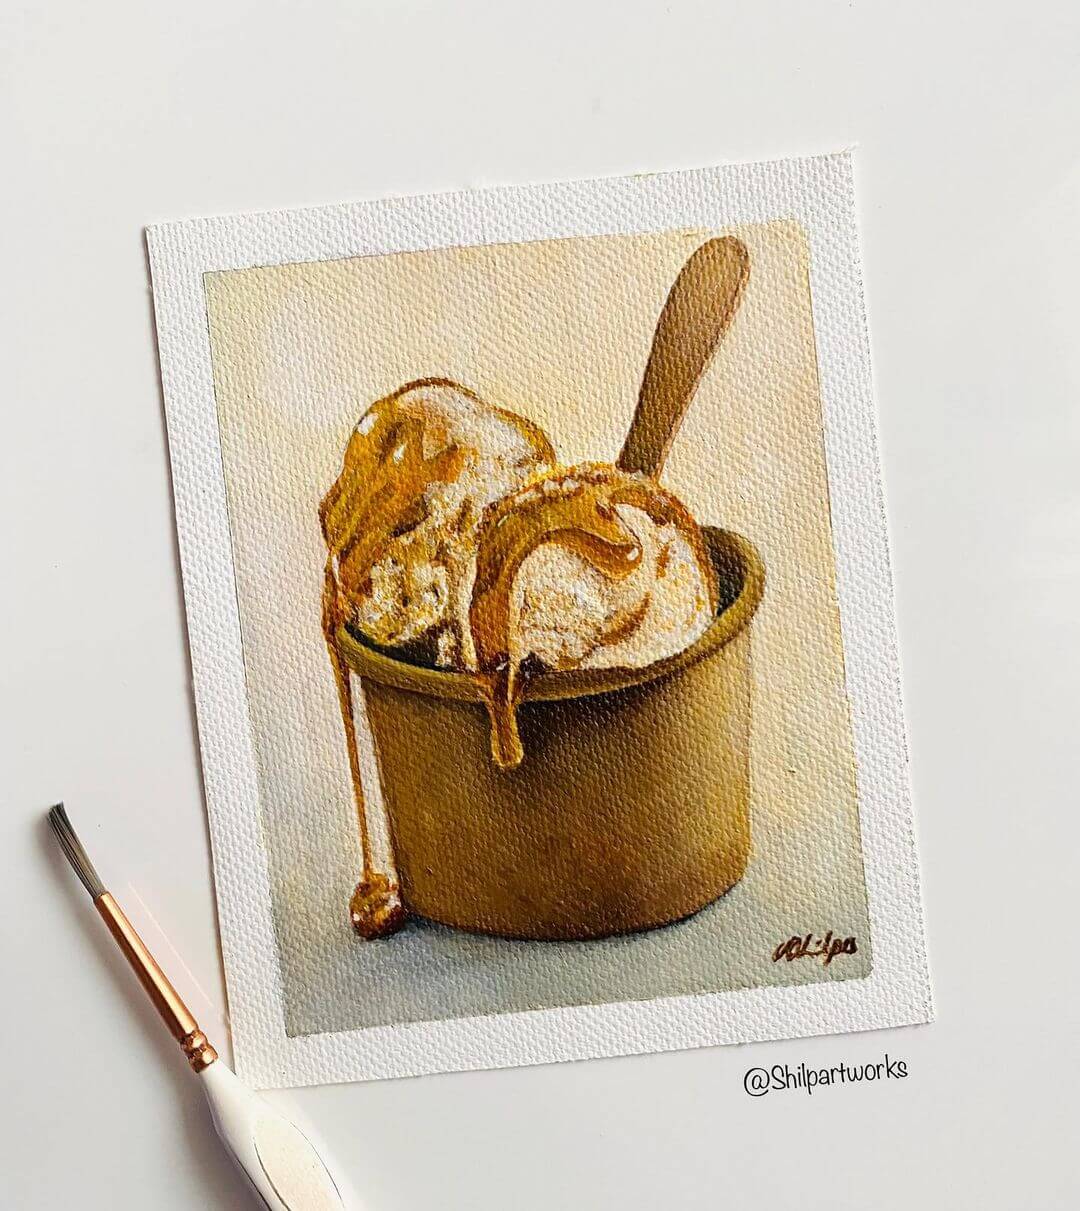 4. A realistic painting of ice cream in a cup with caramel drizzled on top.